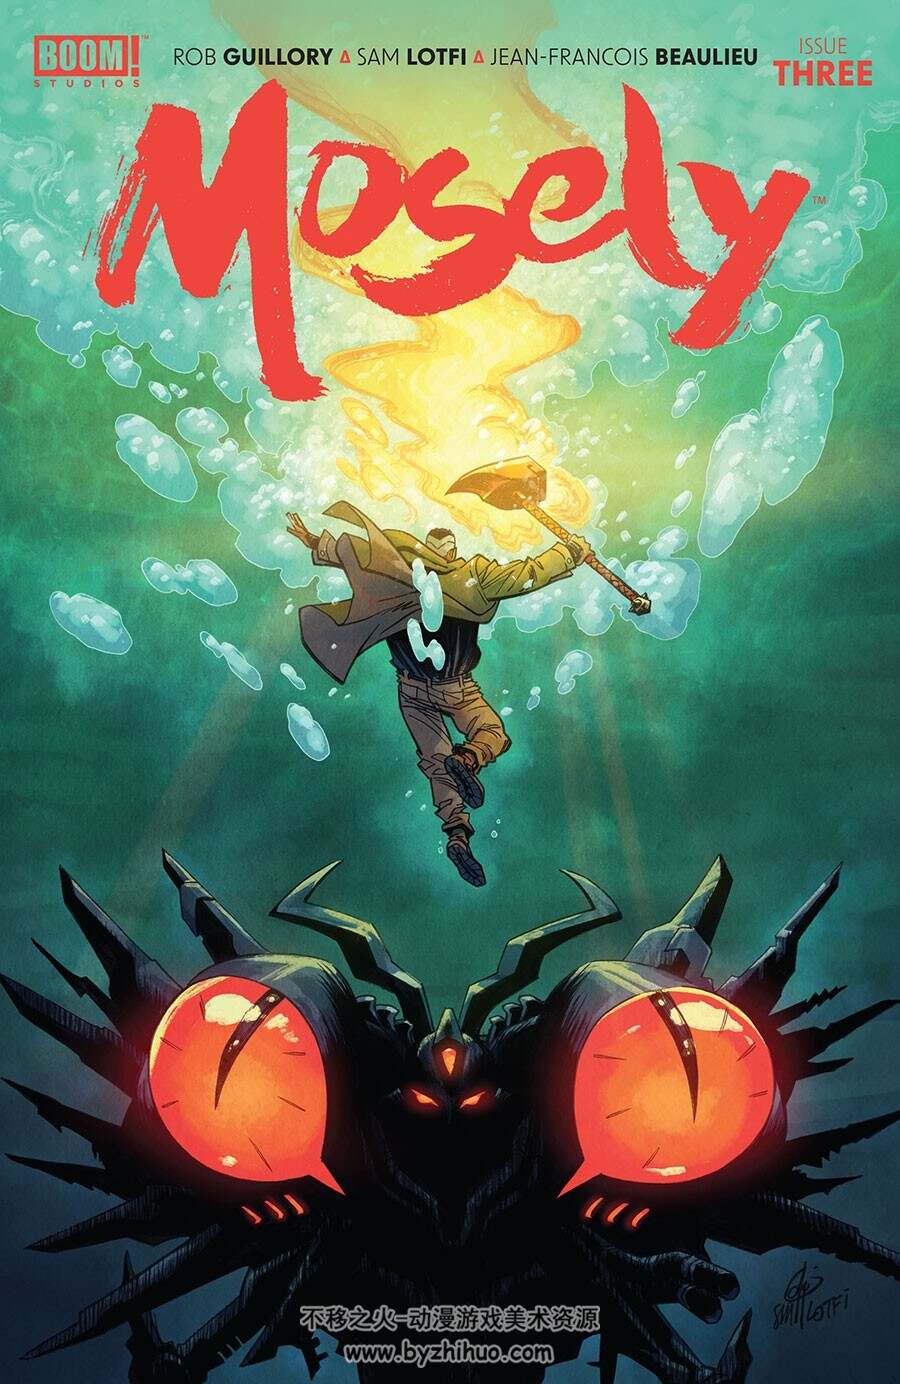 Mosely 第3册 [共5册] Rob Guillory 漫画下载